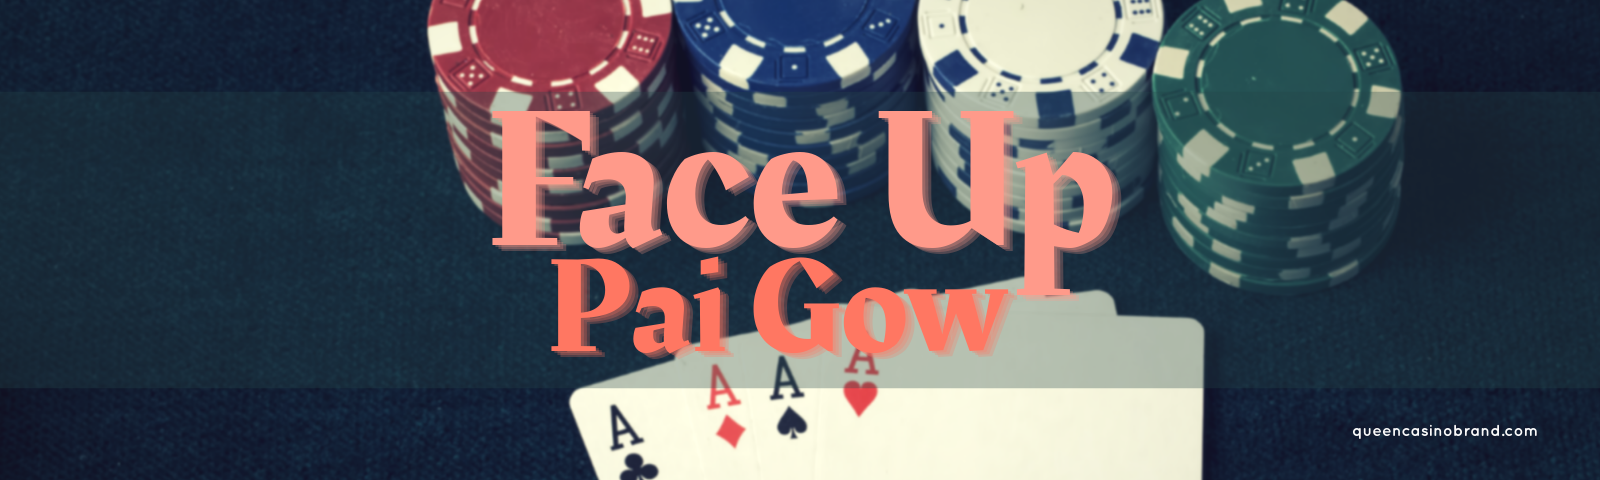 Face Up Pai Gow Casino Game Guide | Queen Casino Brand